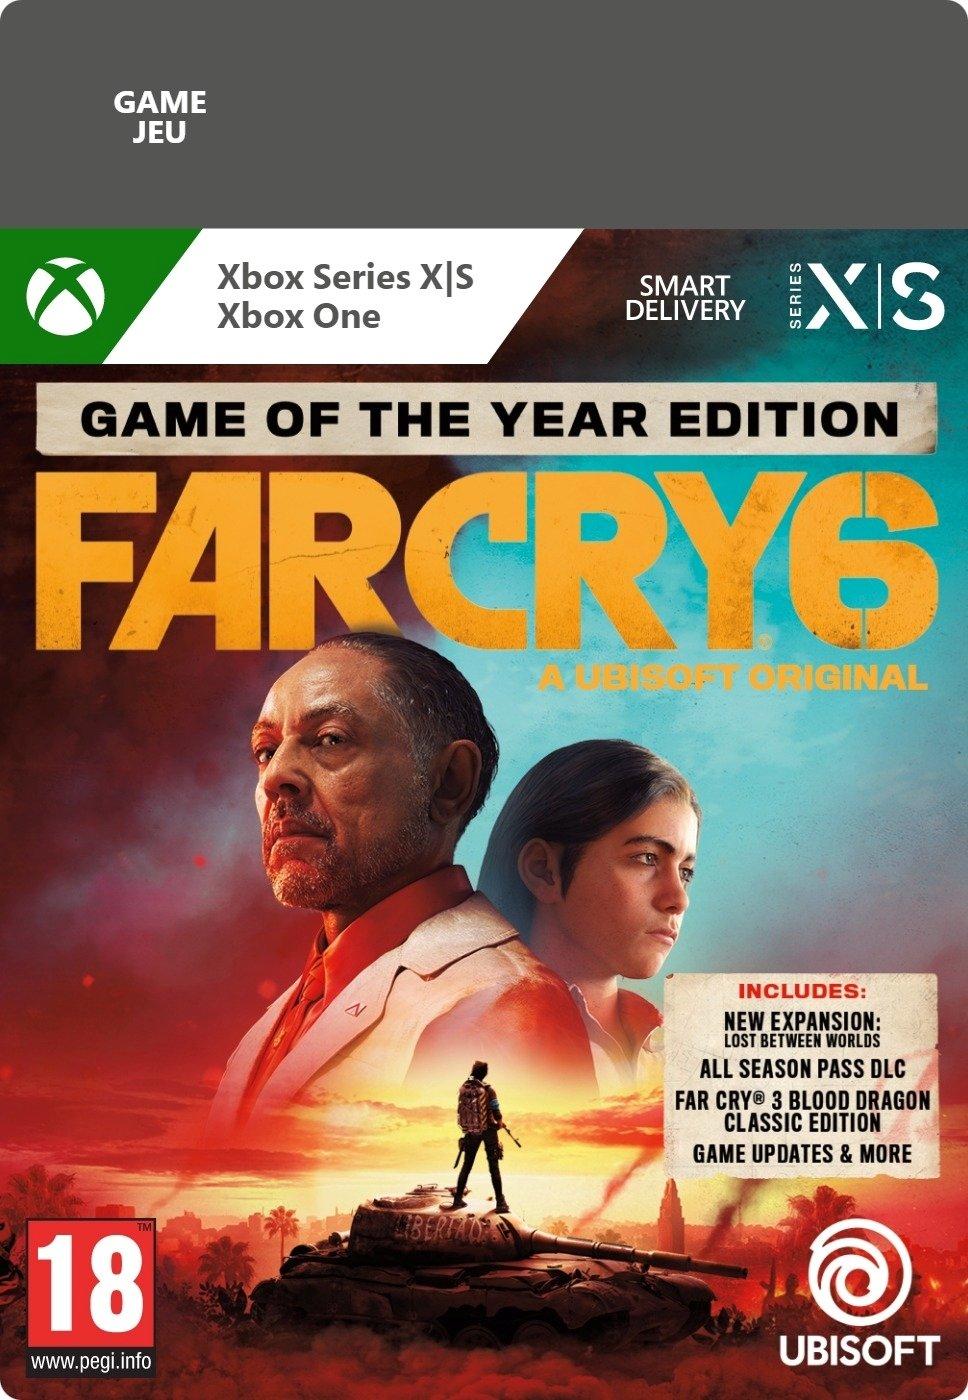 Far Cry 6 Game of the Year Edition - Xbox Series X/Xbox One - Game | G3Q-01427 (95c75171-5197-c14d-90d0-08d19391de79)